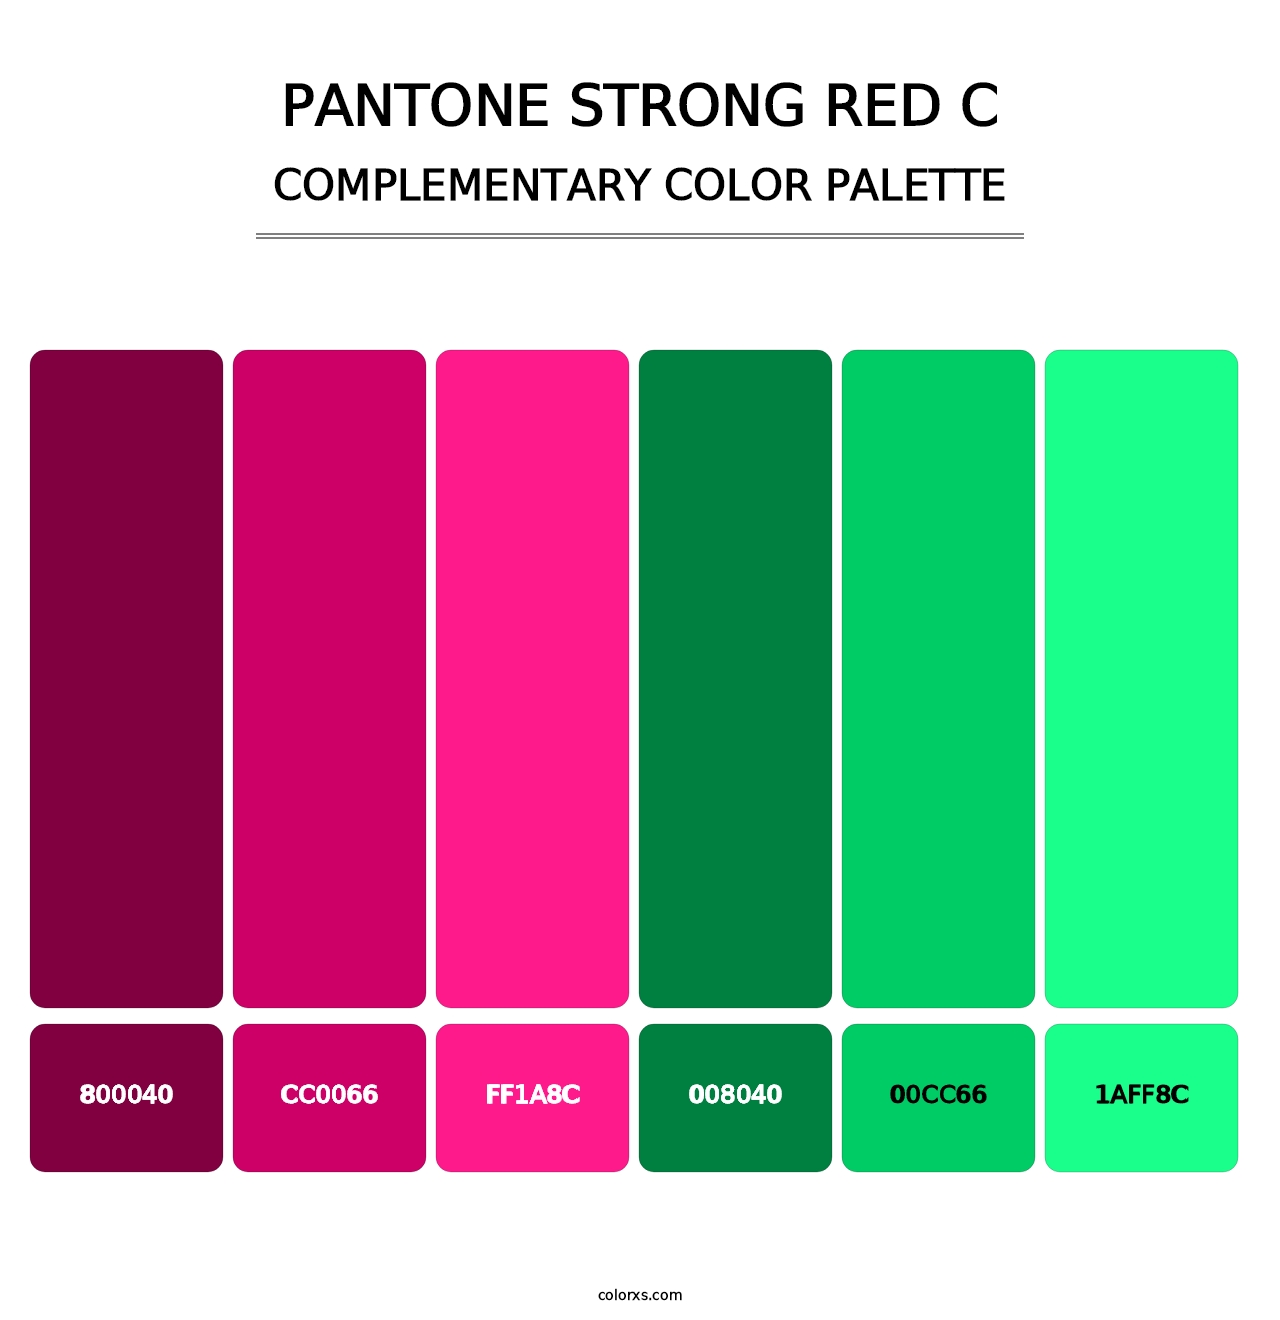 PANTONE Strong Red C - Complementary Color Palette